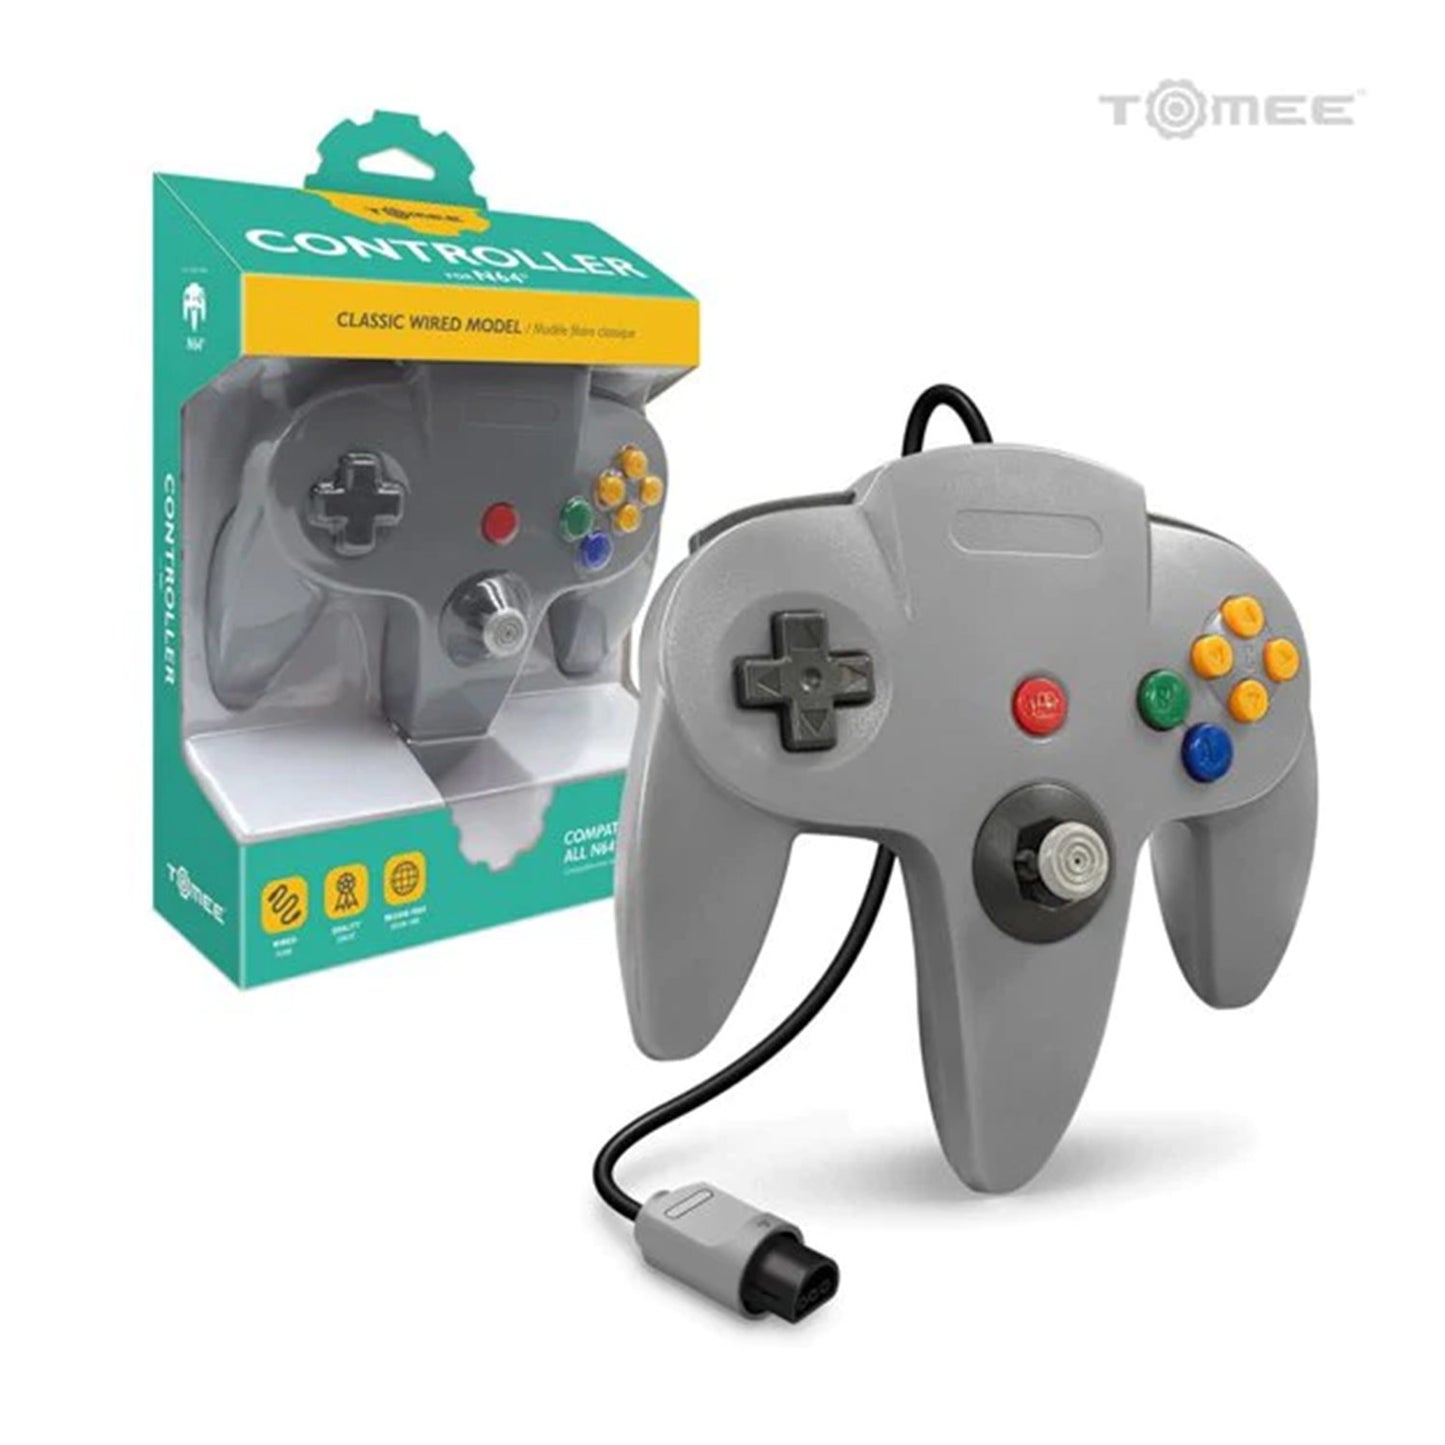 TOMEE CONTROLLER FOR N64®